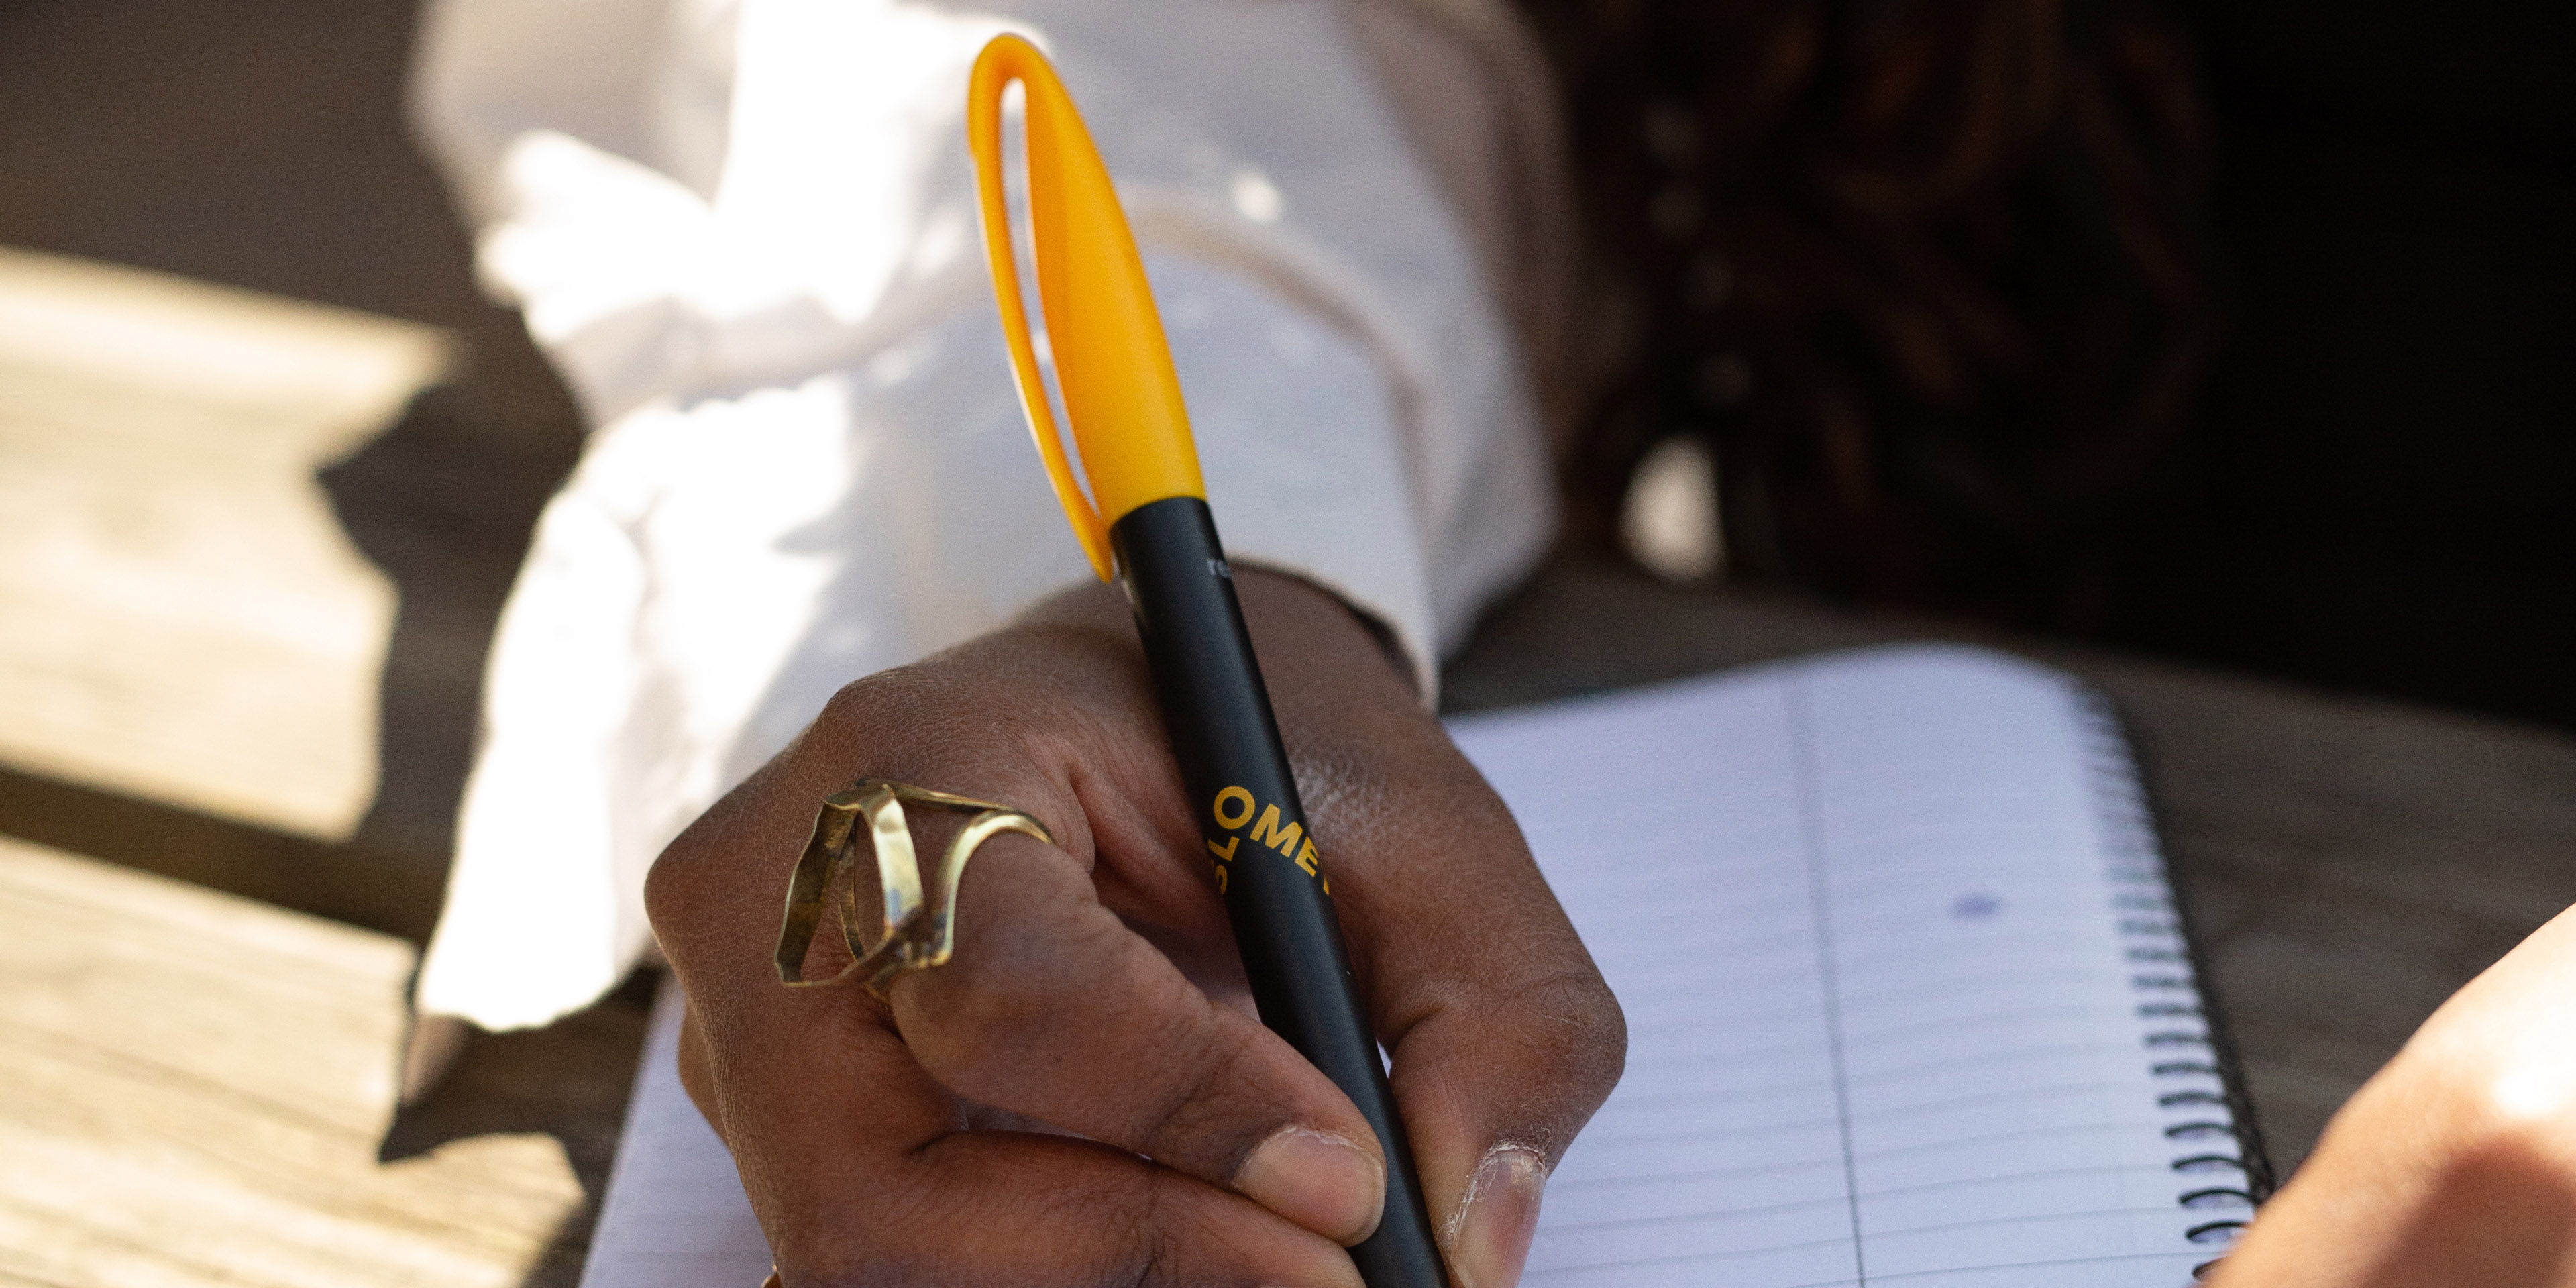 A black pen with a yellow top. On the black part of the pen is the yellow OsloMet logo